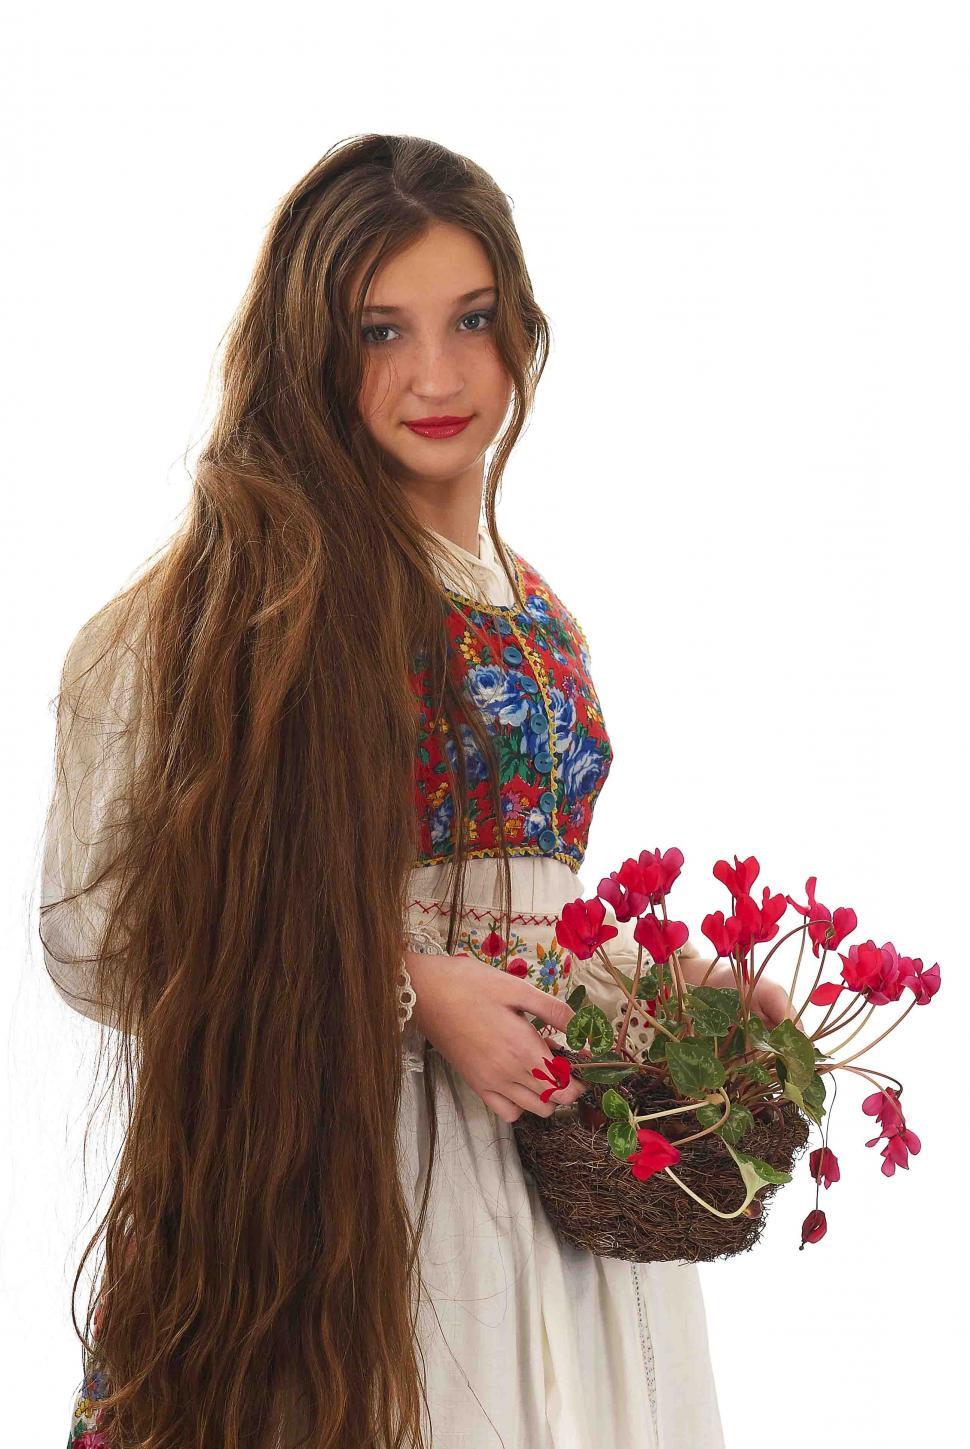 Free Image of Girl with Flowers 